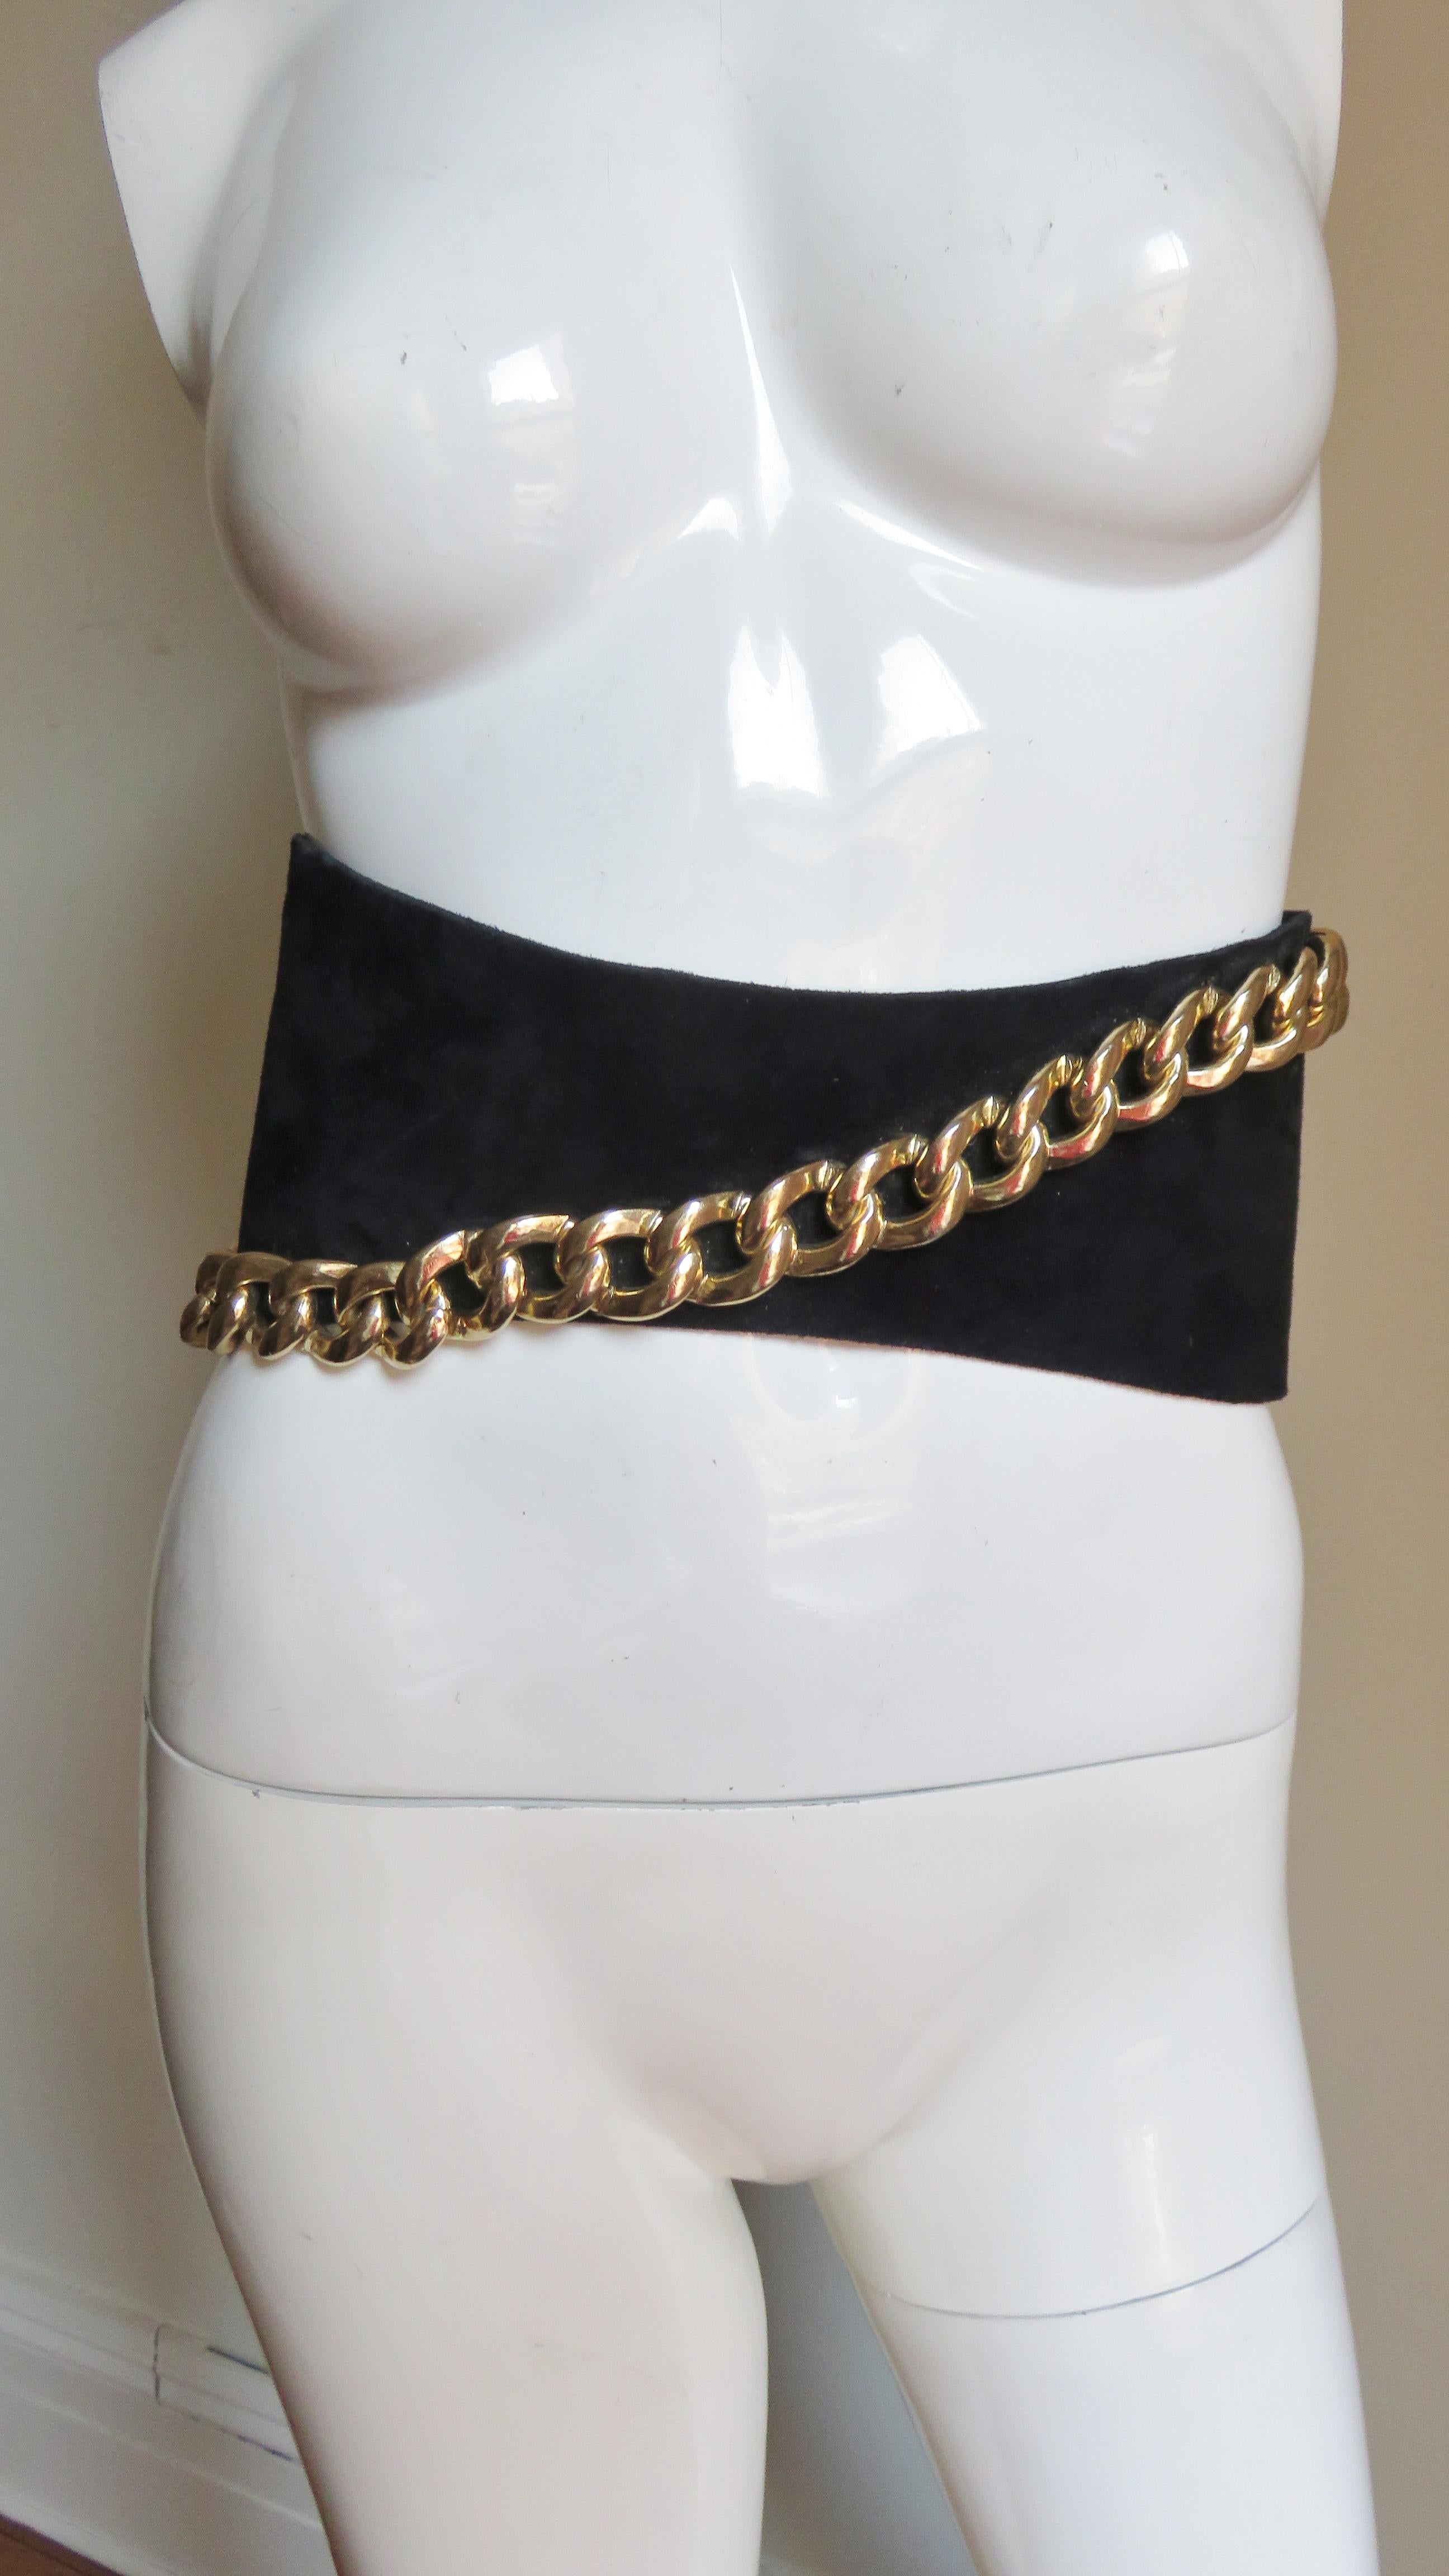 A fabulous black suede belt adorned with a 1